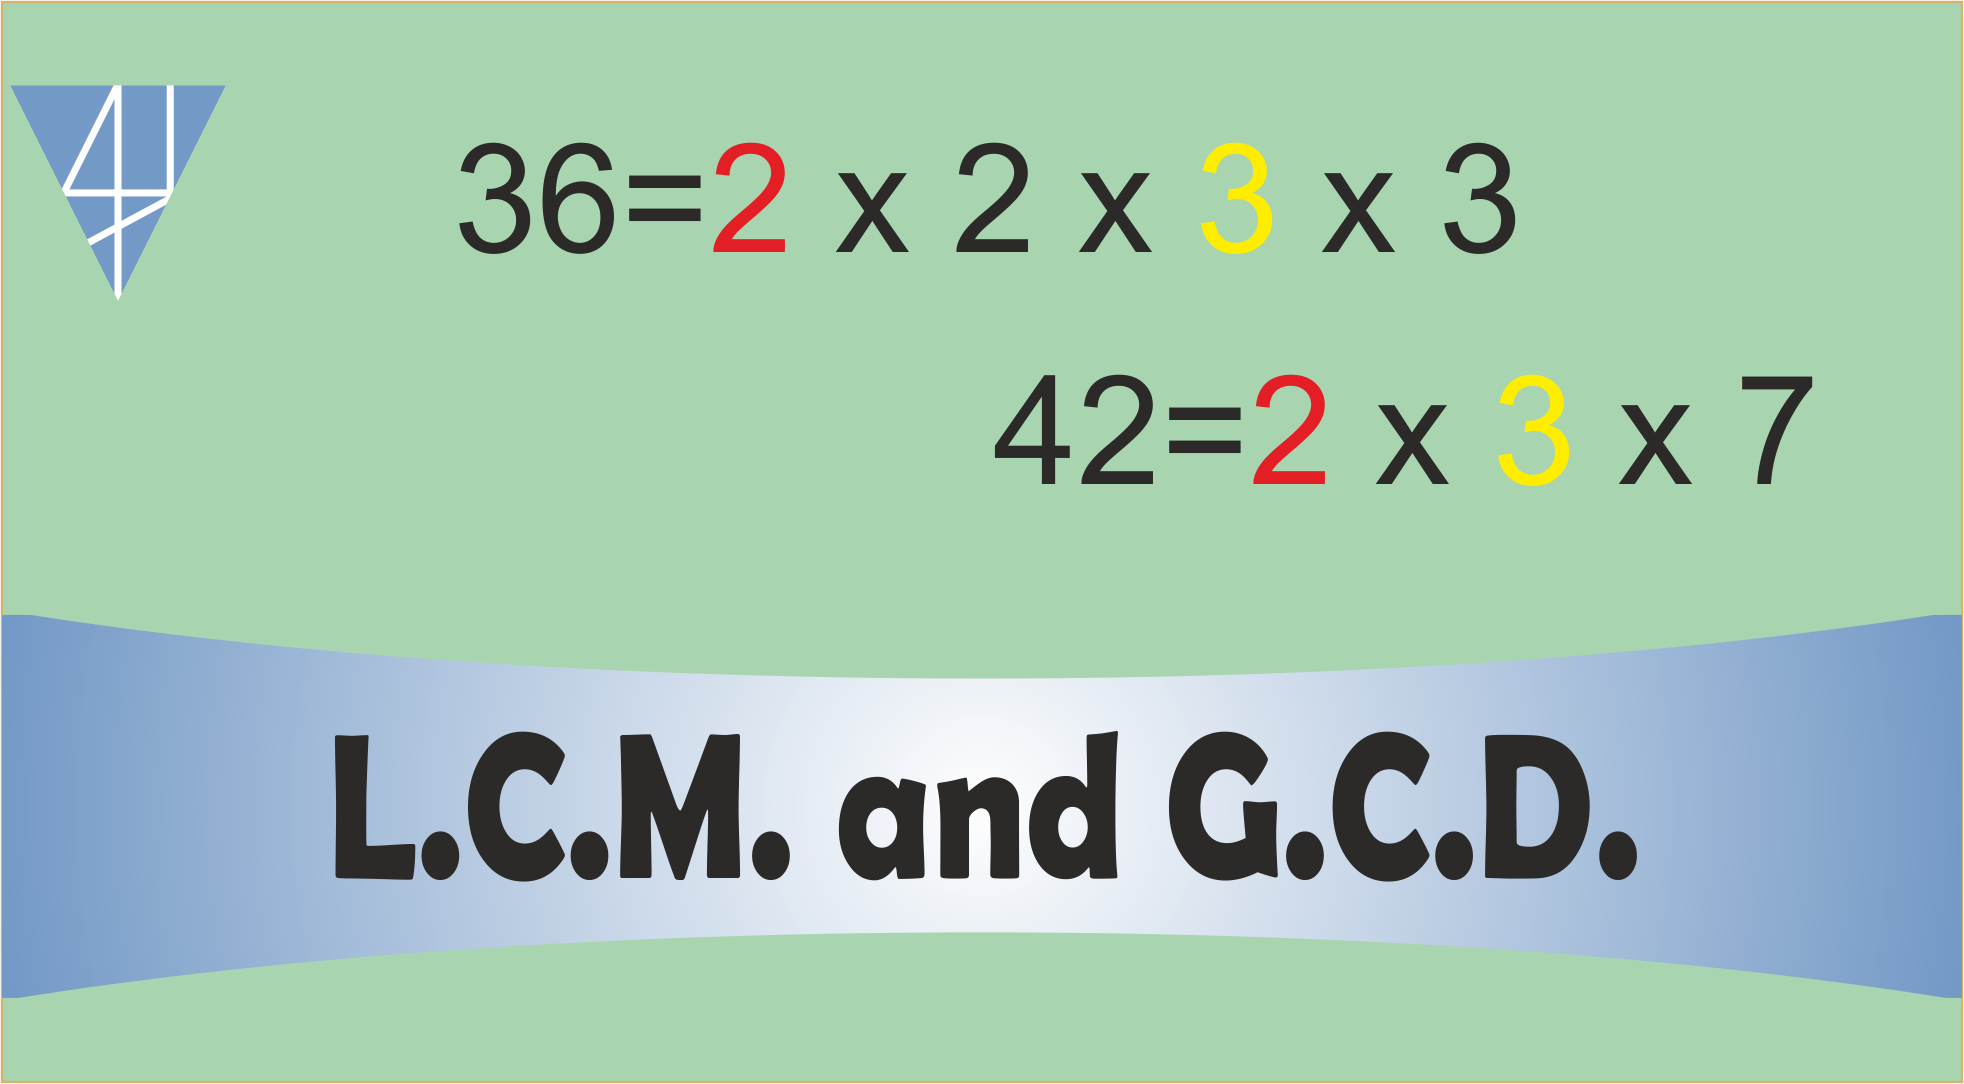 BMS12-L.C.M. and G.C.D.